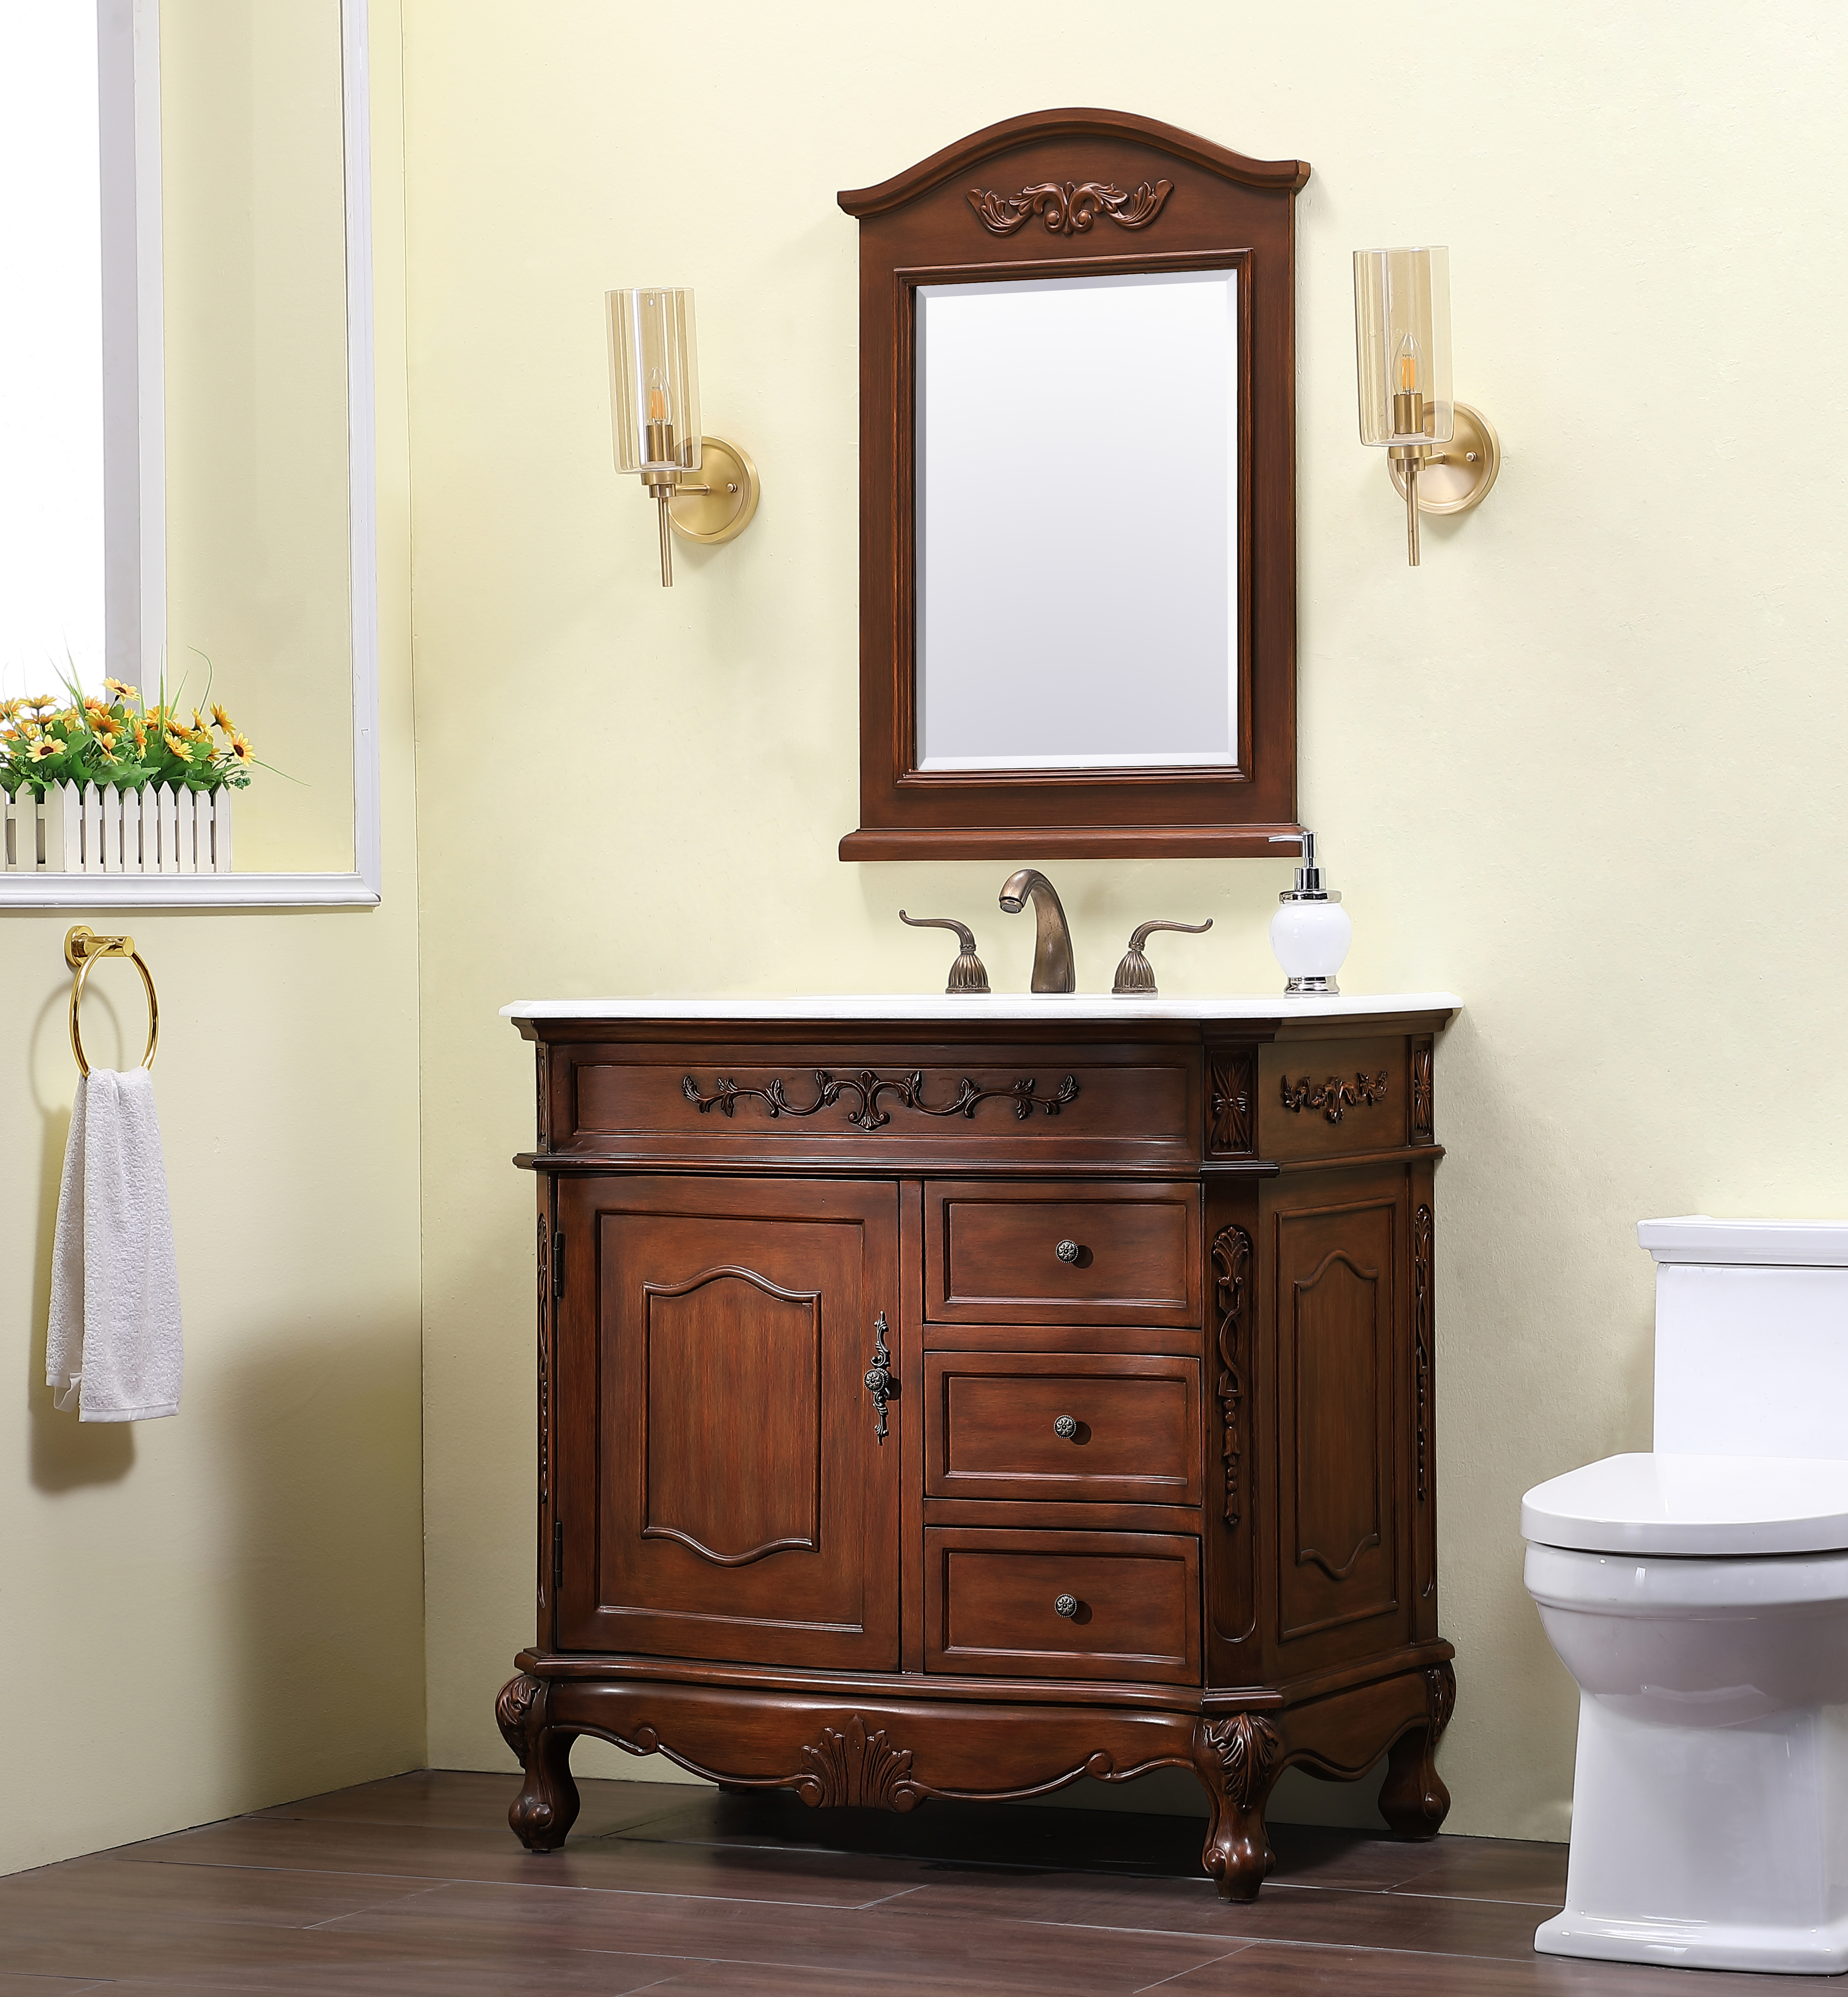 36" Antique Deep Chestnut Finish Vanity with Mirror, Med Cab, and Linen Cabinet Options